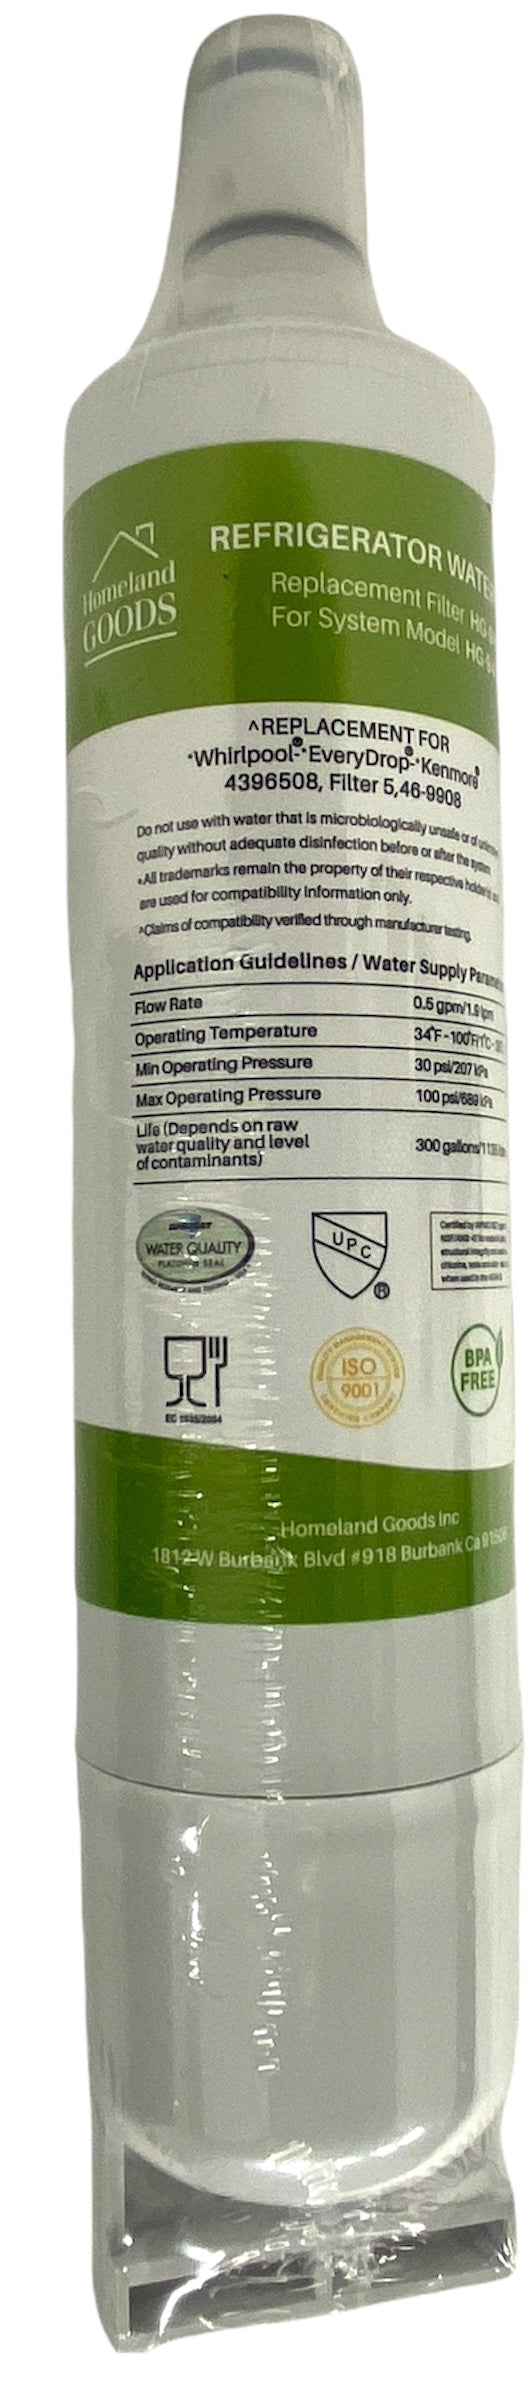 RWF0500A Refrigerator Water Filter IAPMO Certified Replacement for EDR5RXD1,4396510,4392857,EveryDrop Filter 5,PUR W10186668,Kenmore 46-9010, NLC240V,RWF0500A Refrigerator Water Filter Replacement